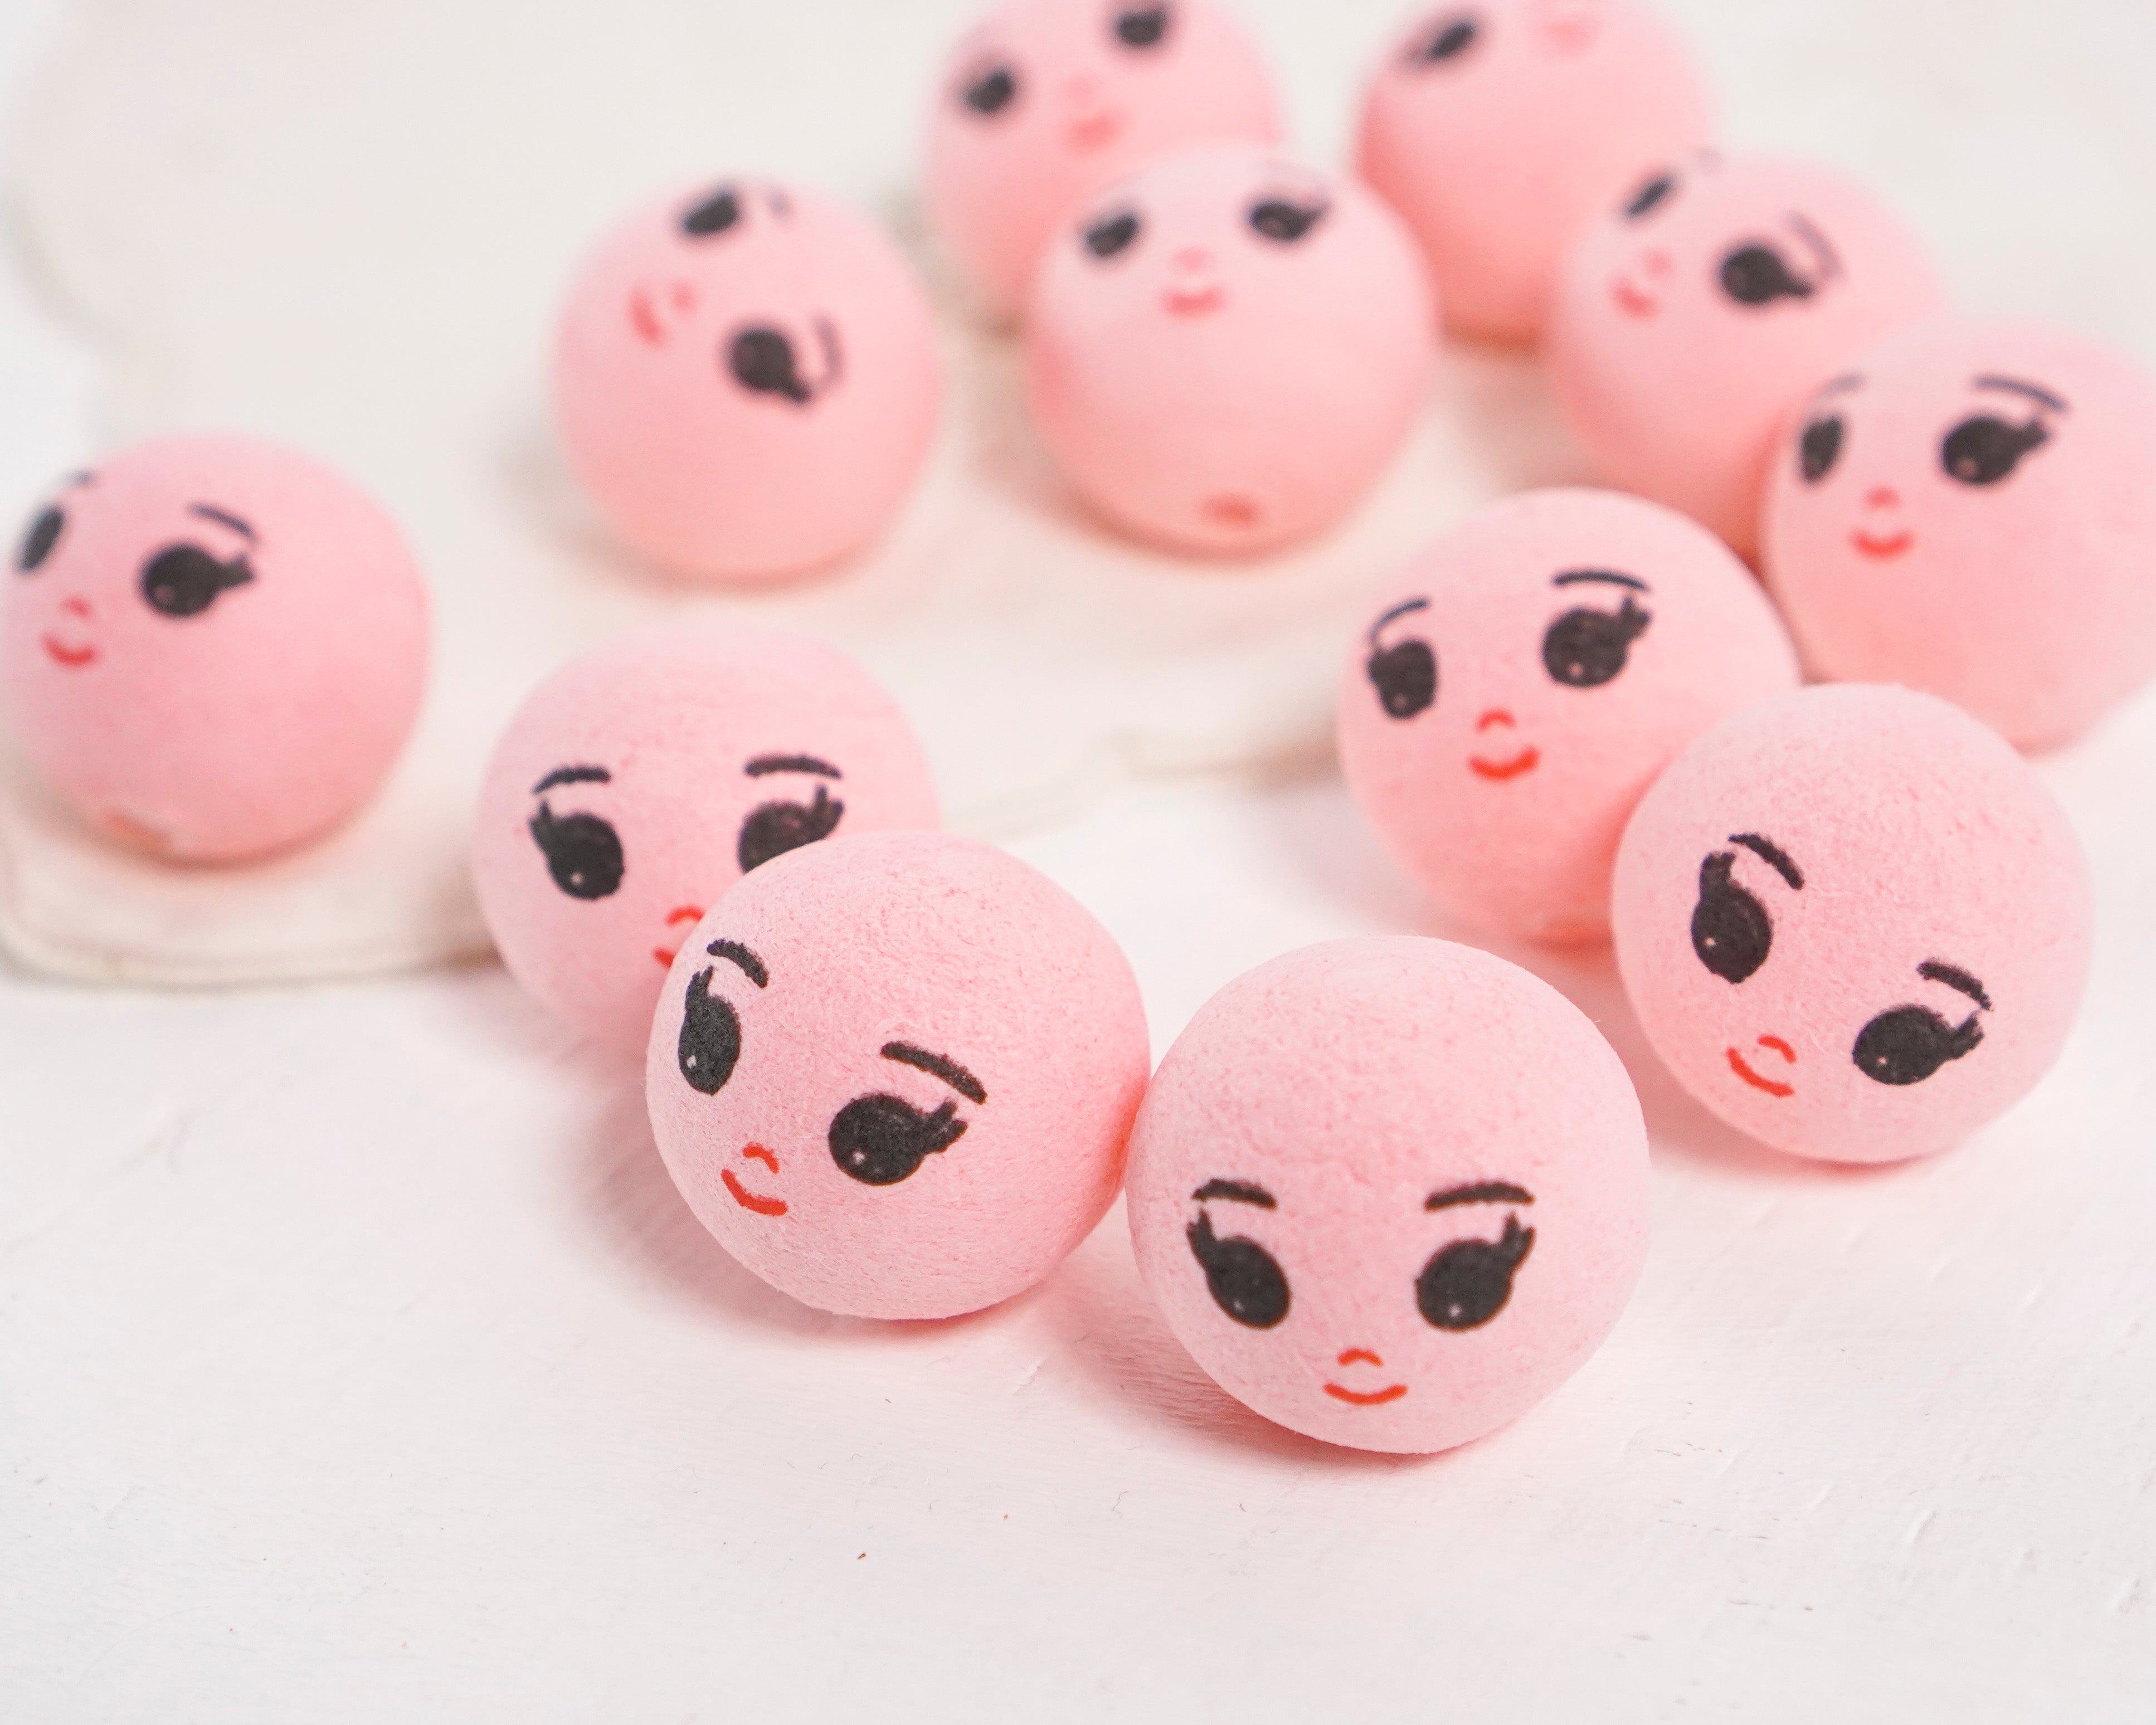 Pink Spun Cotton Heads: DREAMER - 22mm Vintage-Style Cotton Doll Heads with Faces, 12 Pcs.